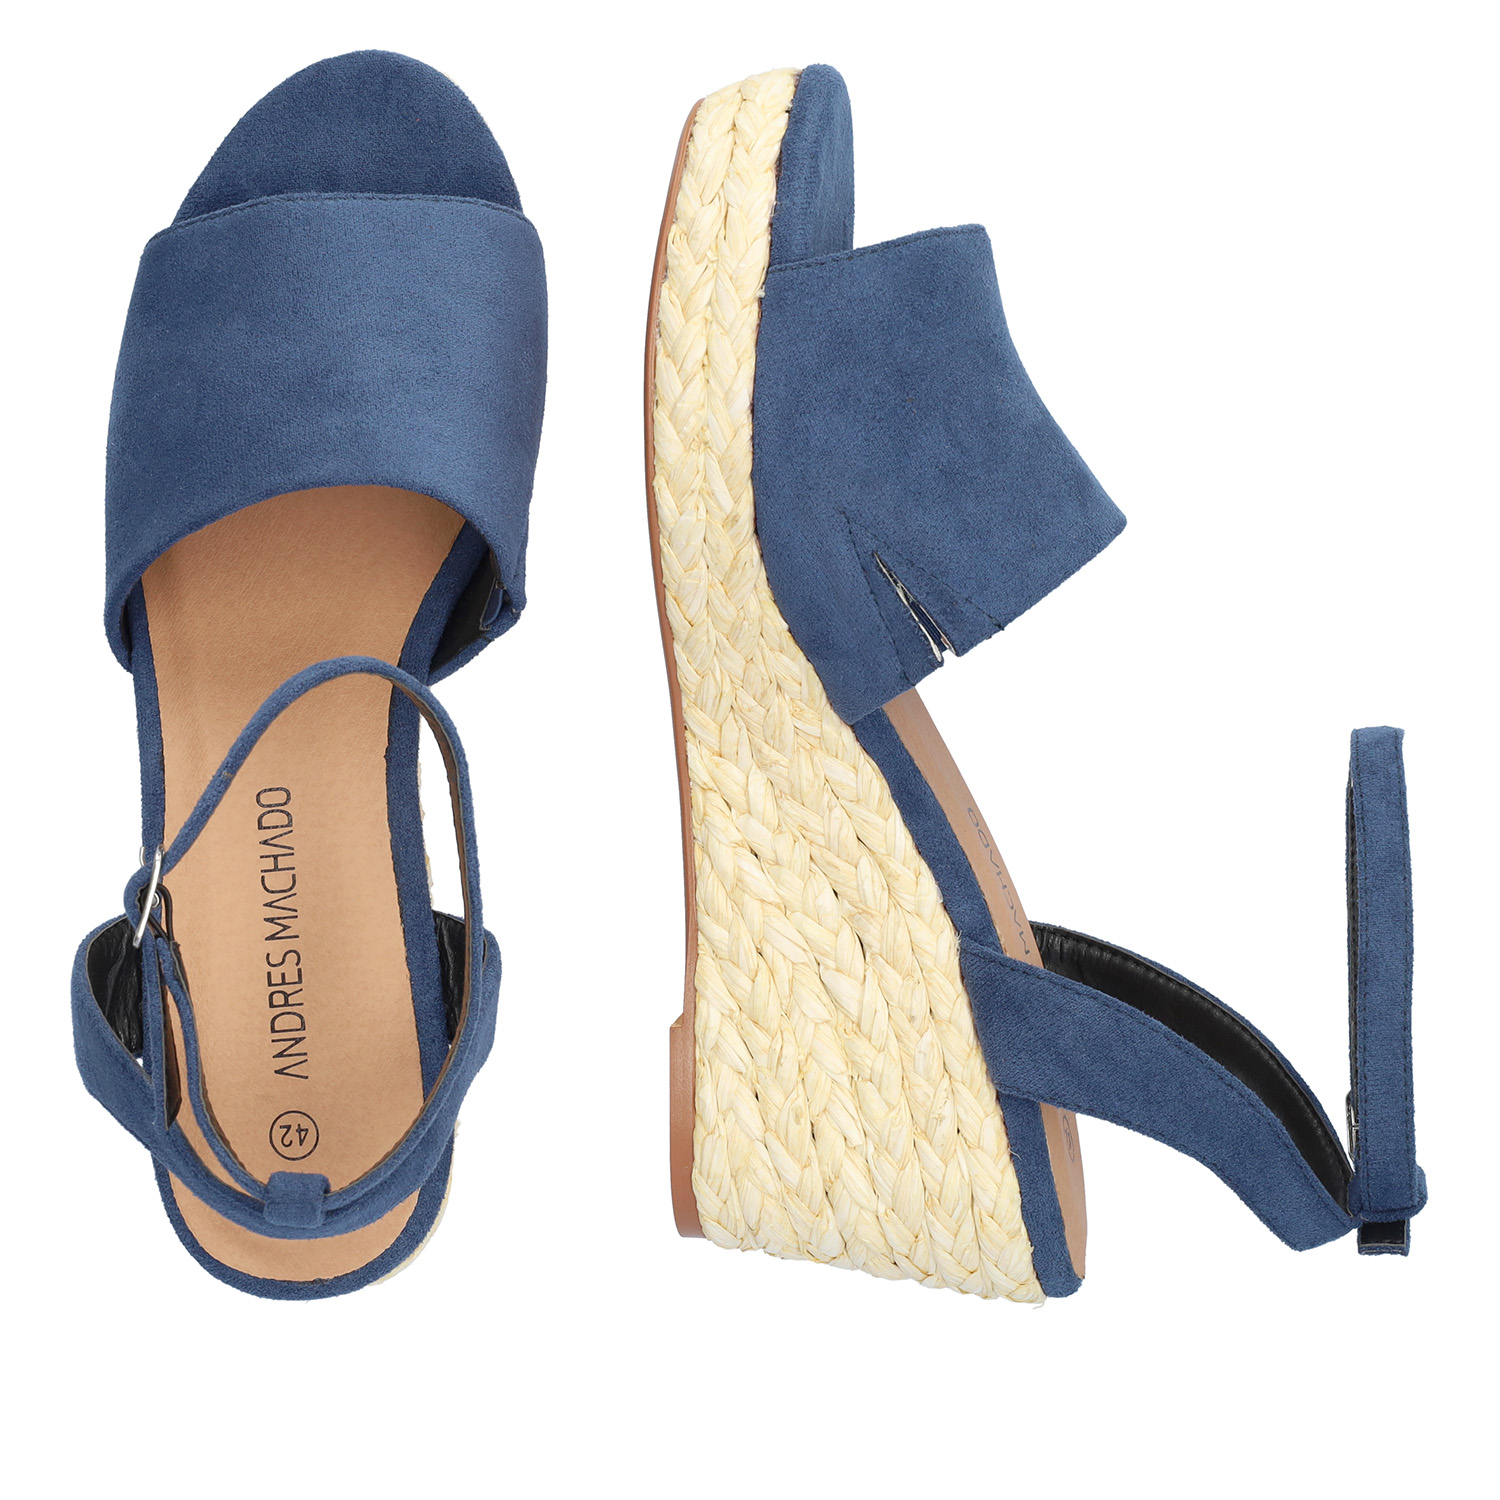 Blue faux suede sandal with a jute wedge 